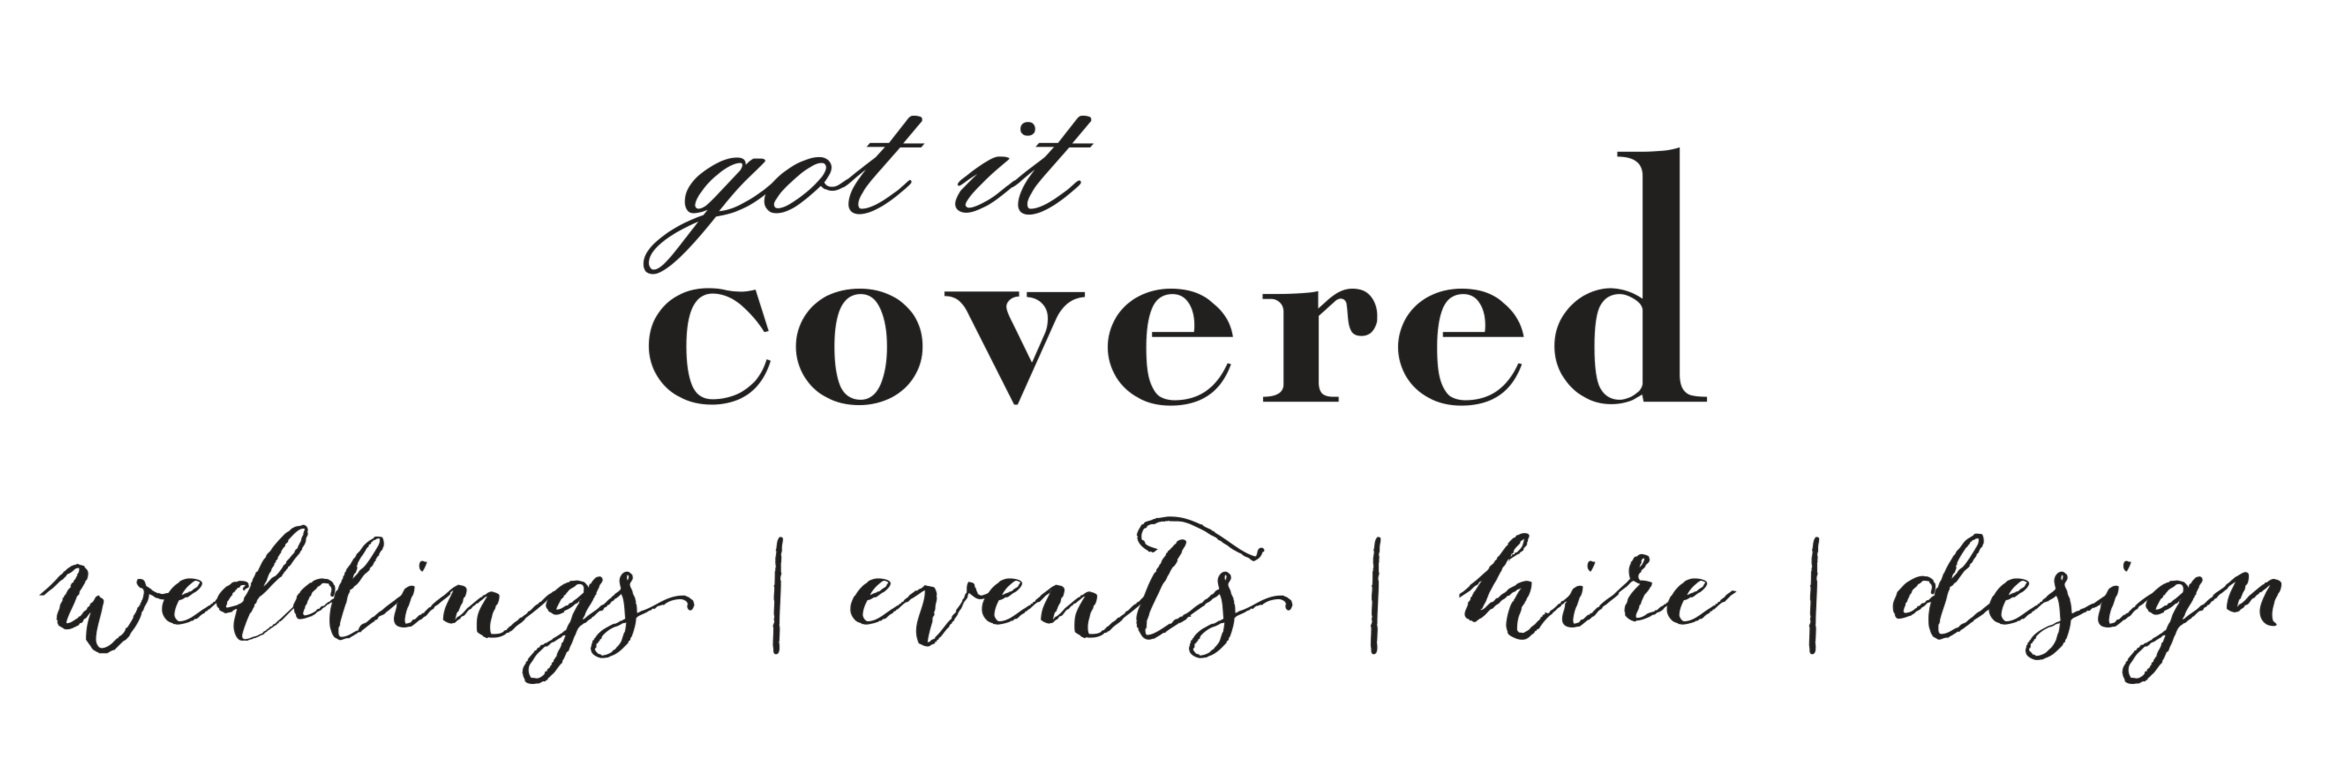 Got It Covered | Wedding | Events | Hire | Design